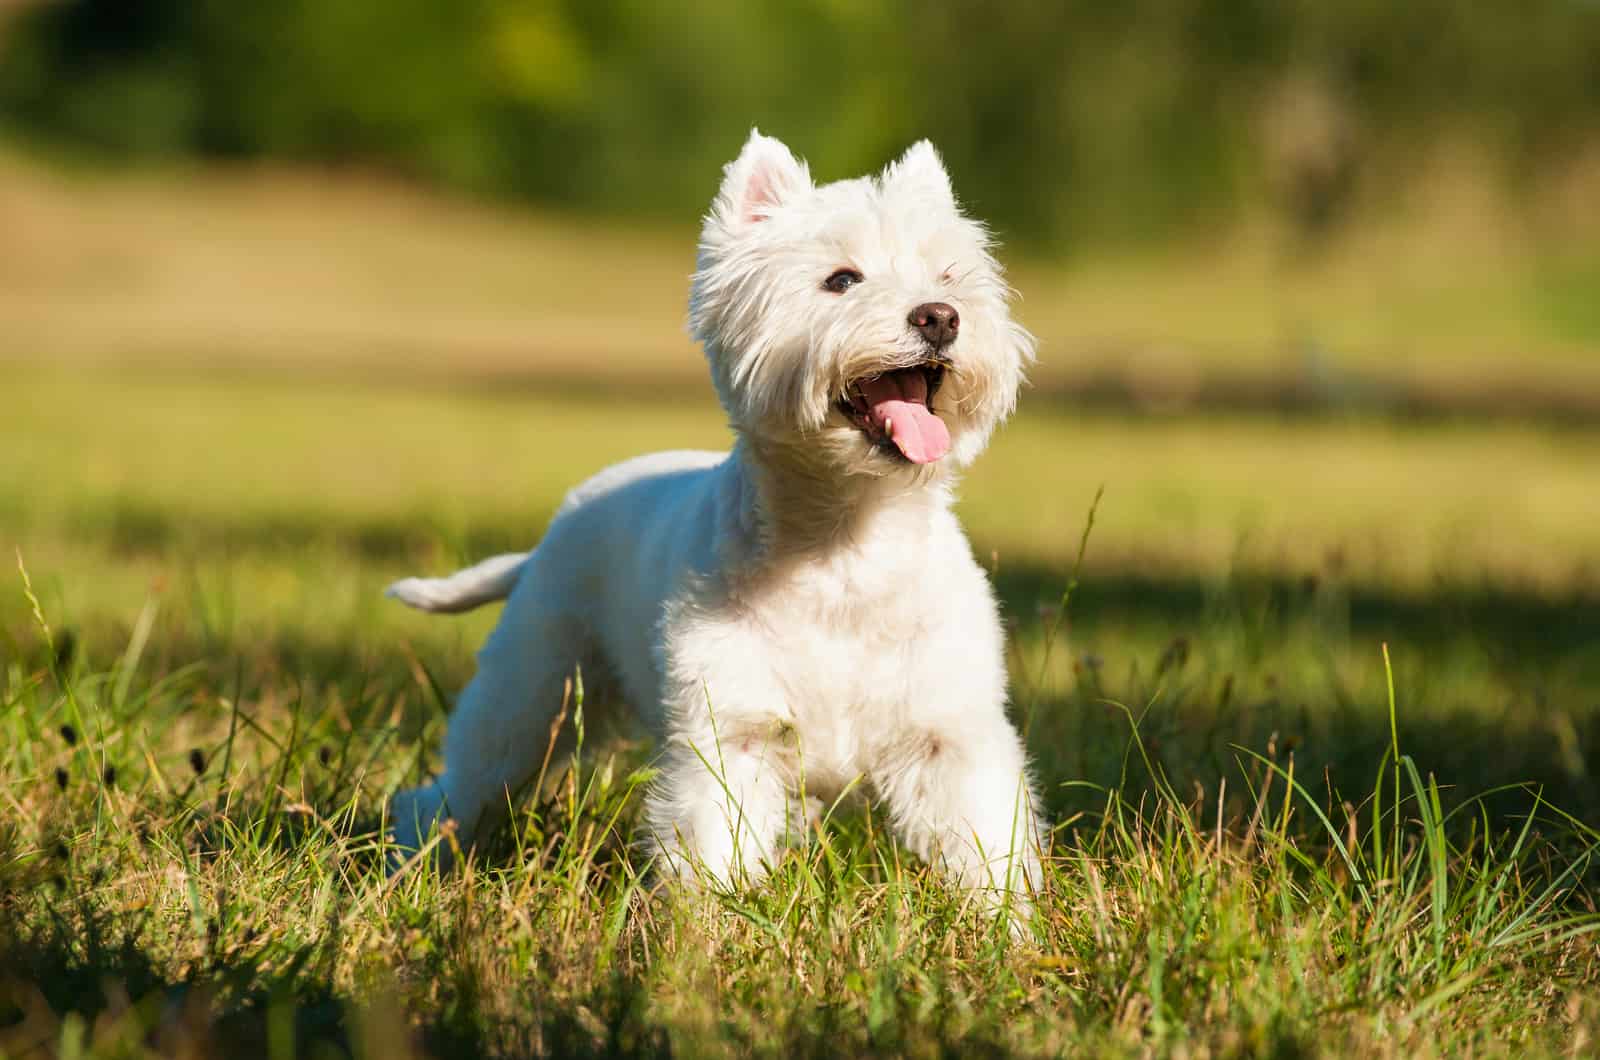 The White Terrier runs across the meadow